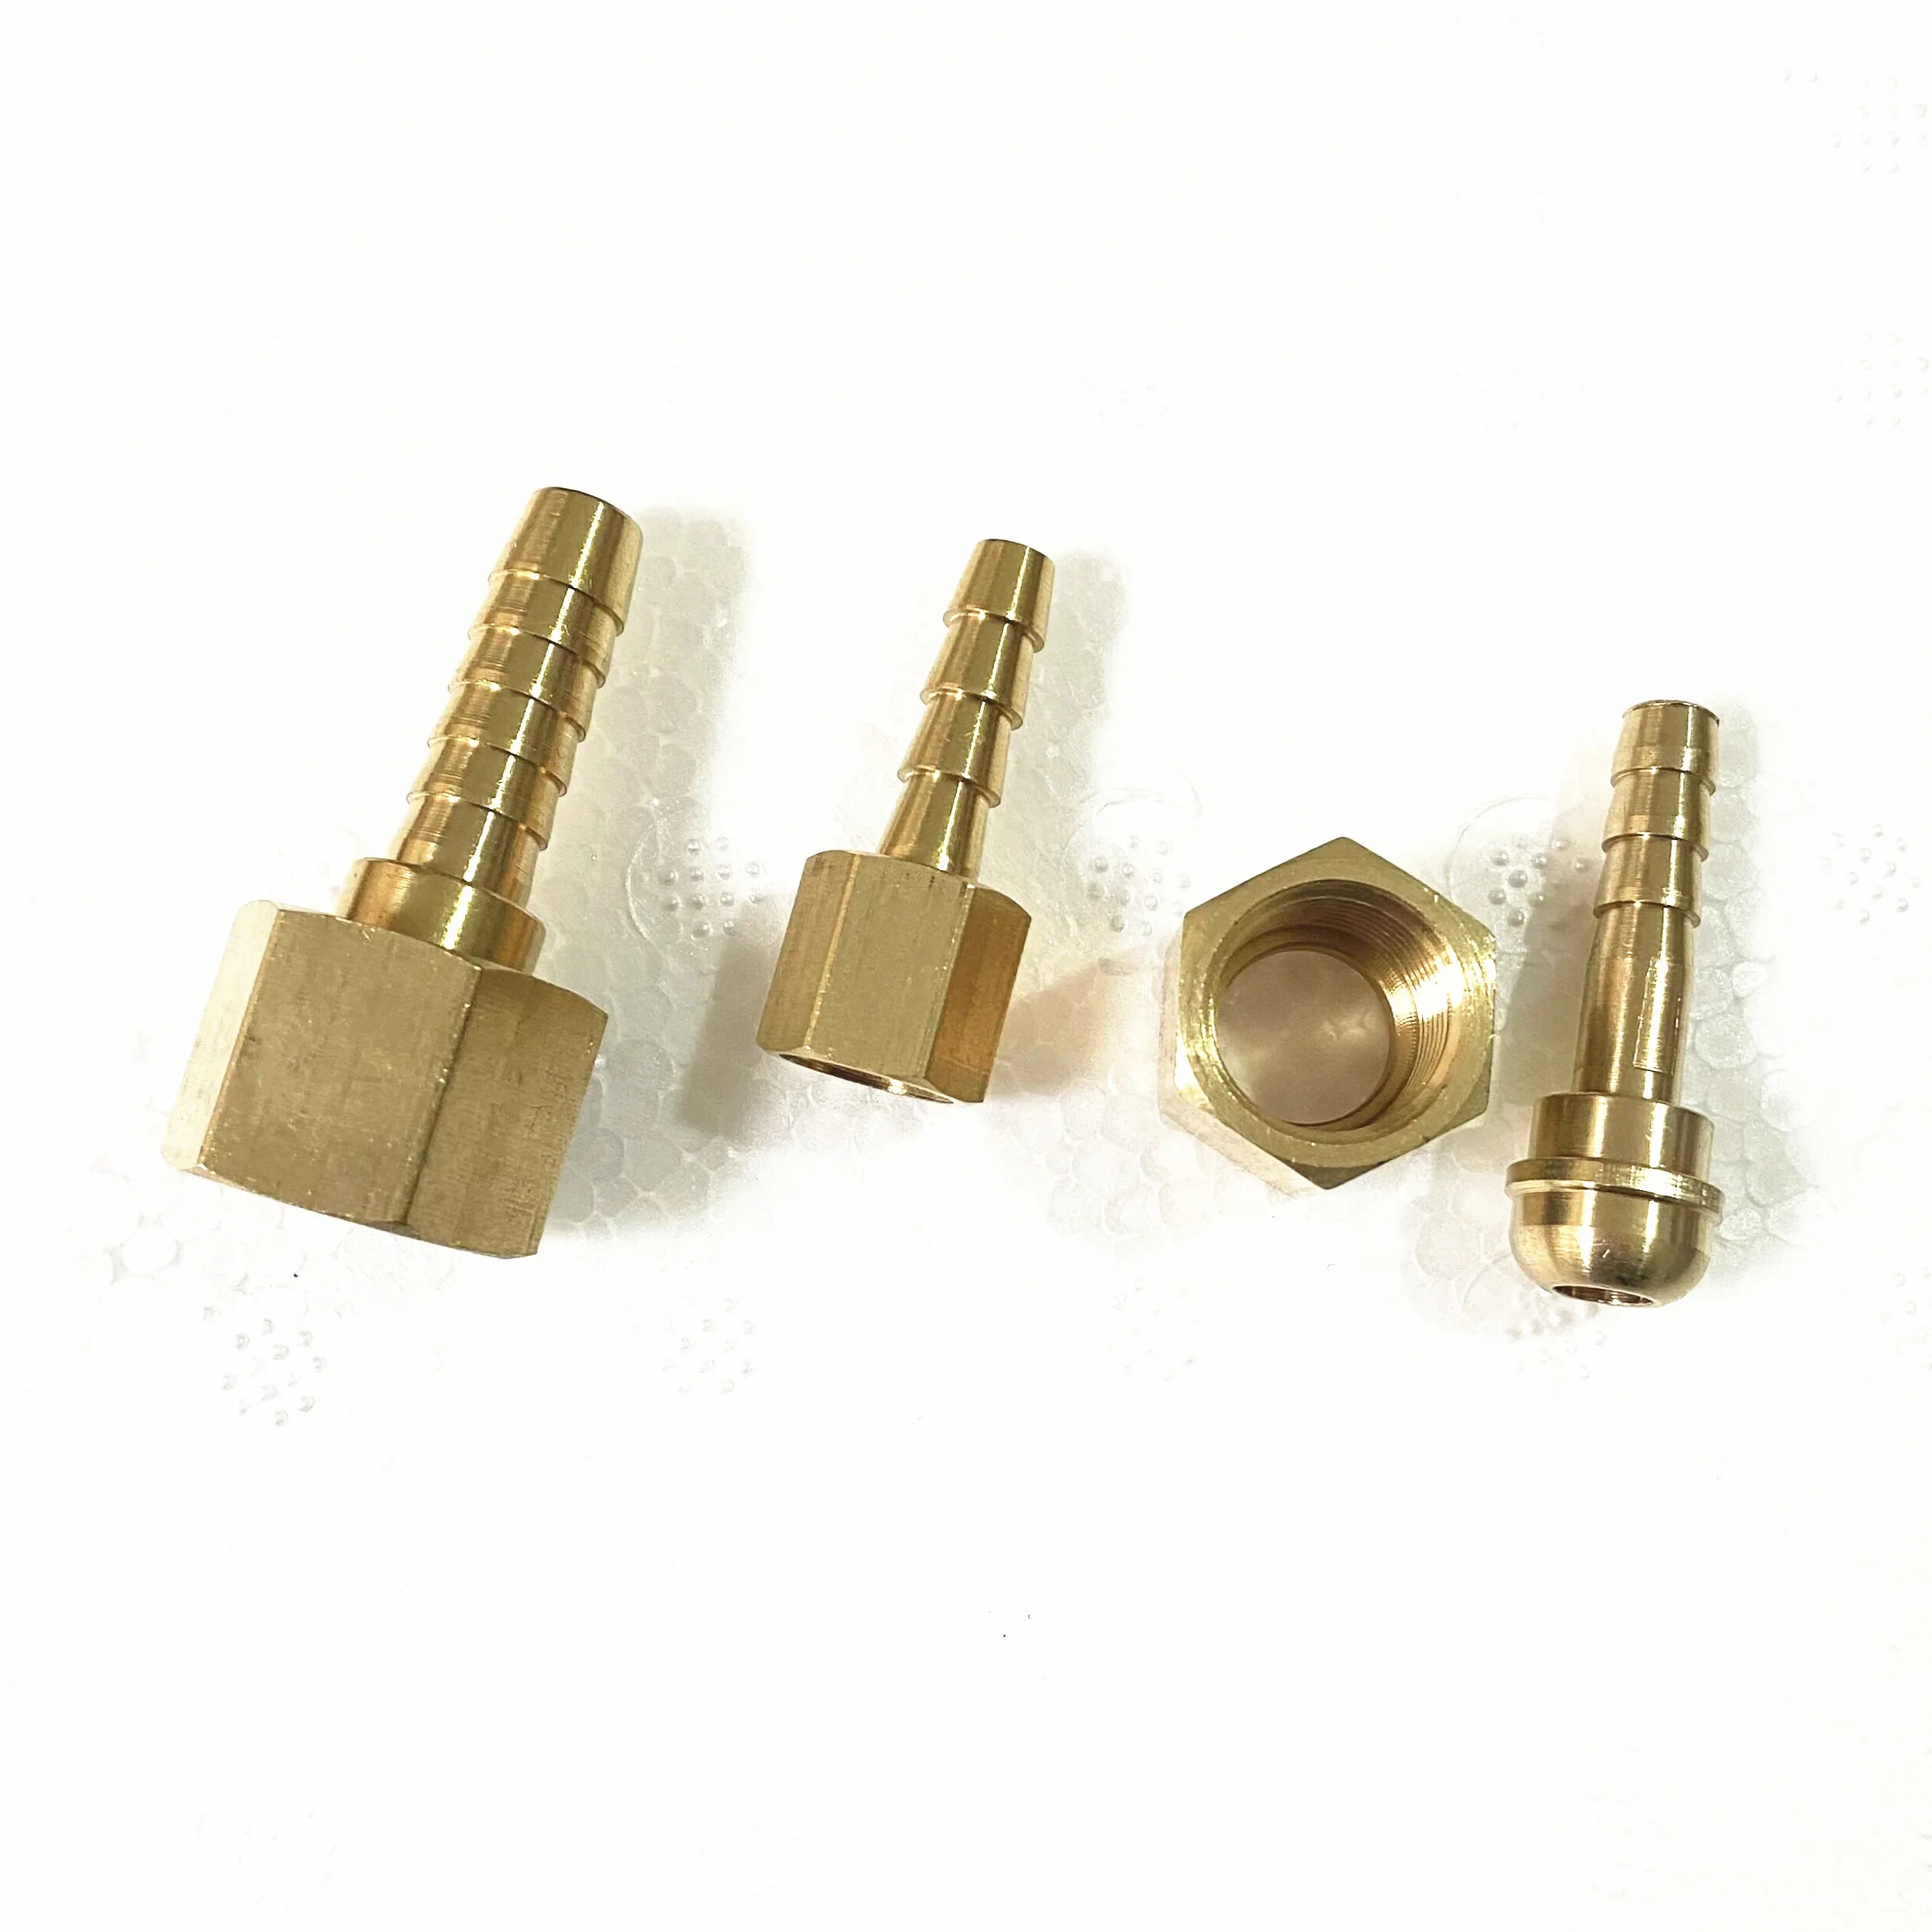 

6mm 8mm 10mm Hose Barb x M10 M12 M14 M16 Metric Female Thread Left Hand Brass Pipe Fitting Coupler Connector Adapter